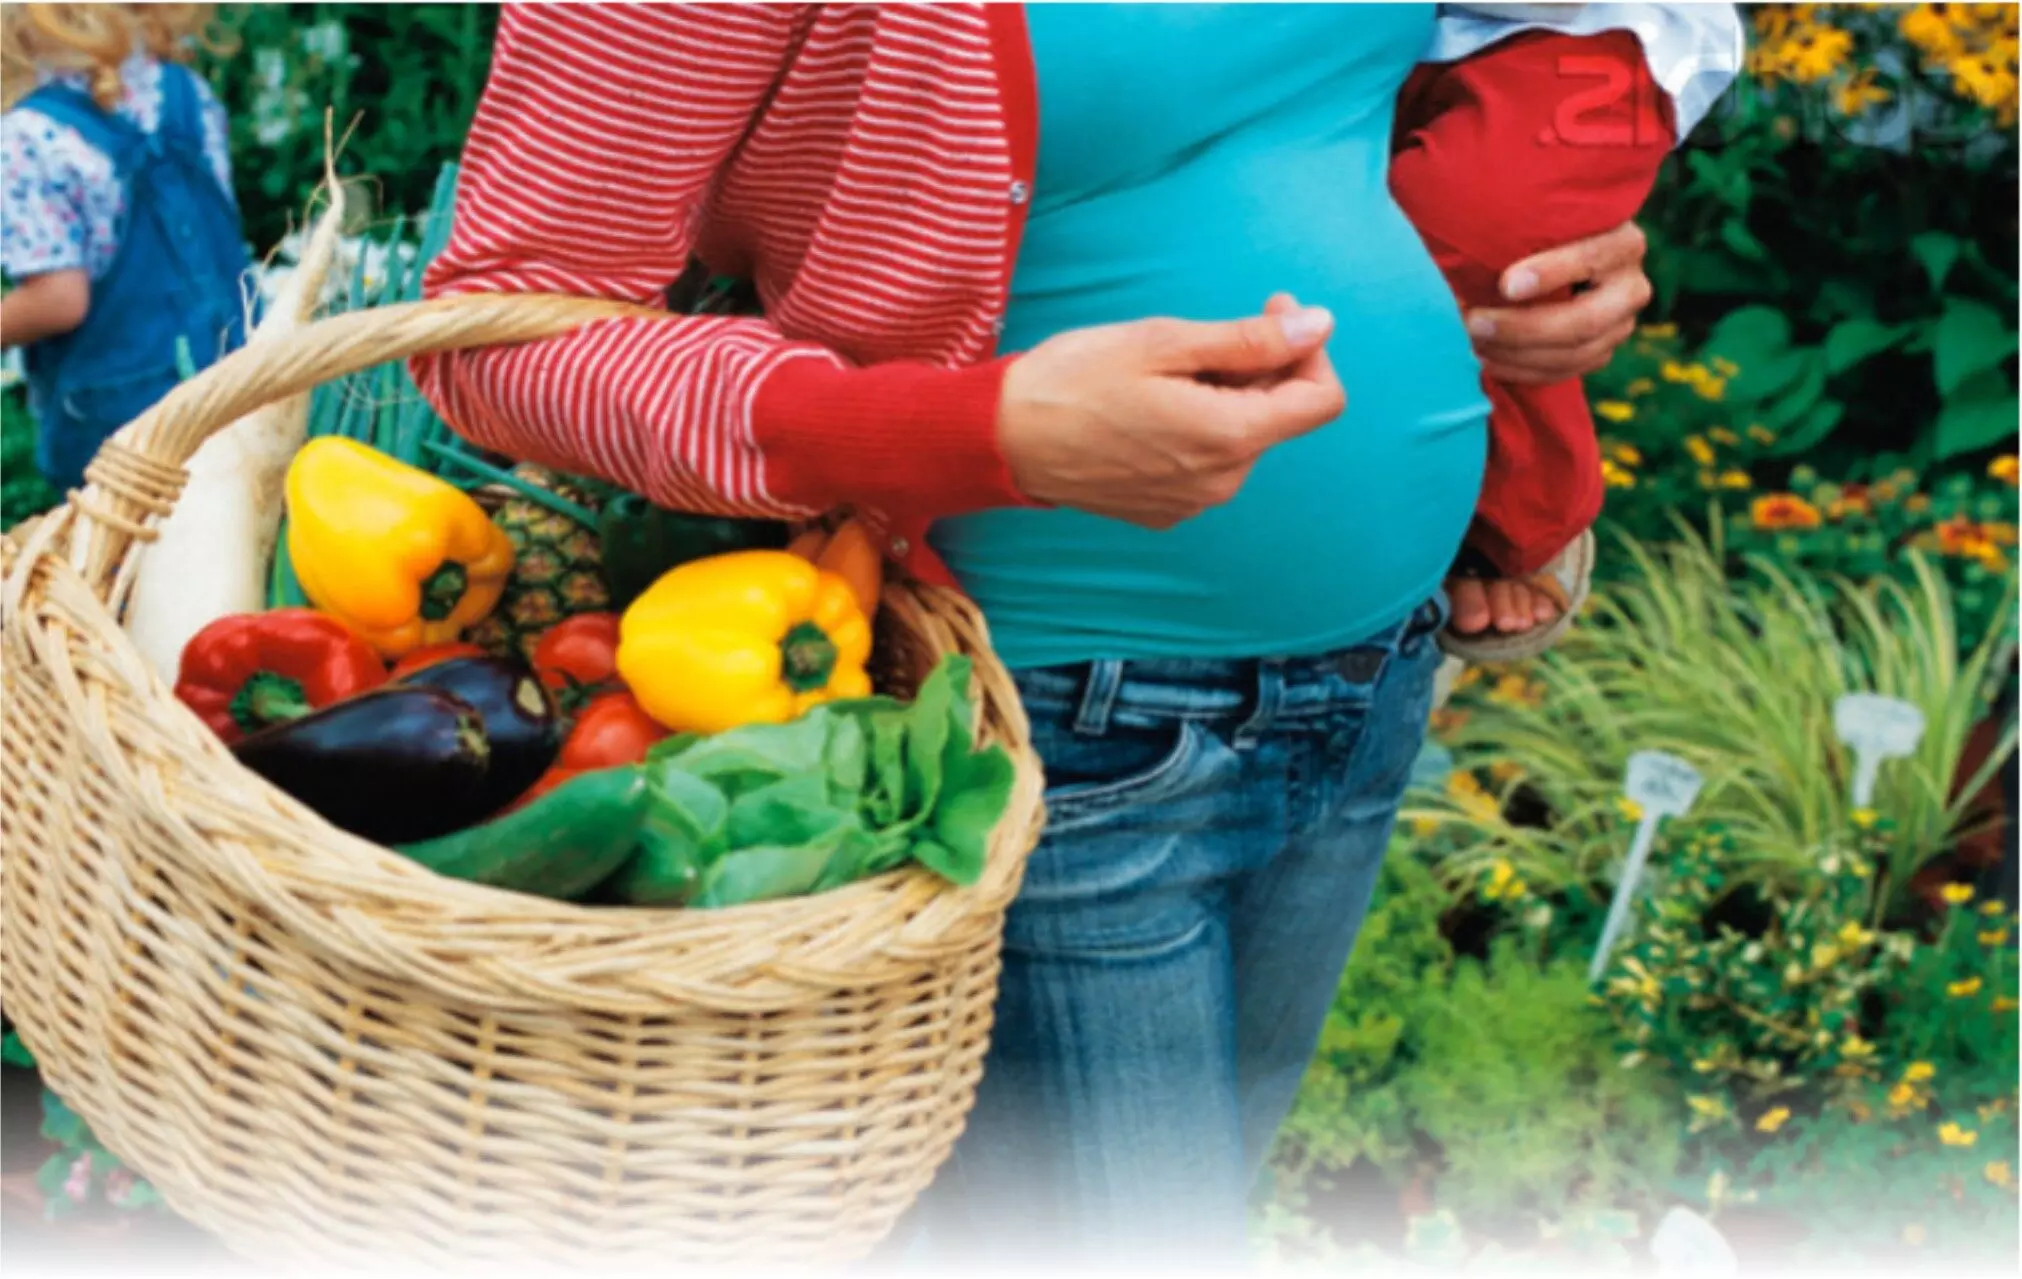 A FOOD GUIDE FOR PREGNANT WOMEN